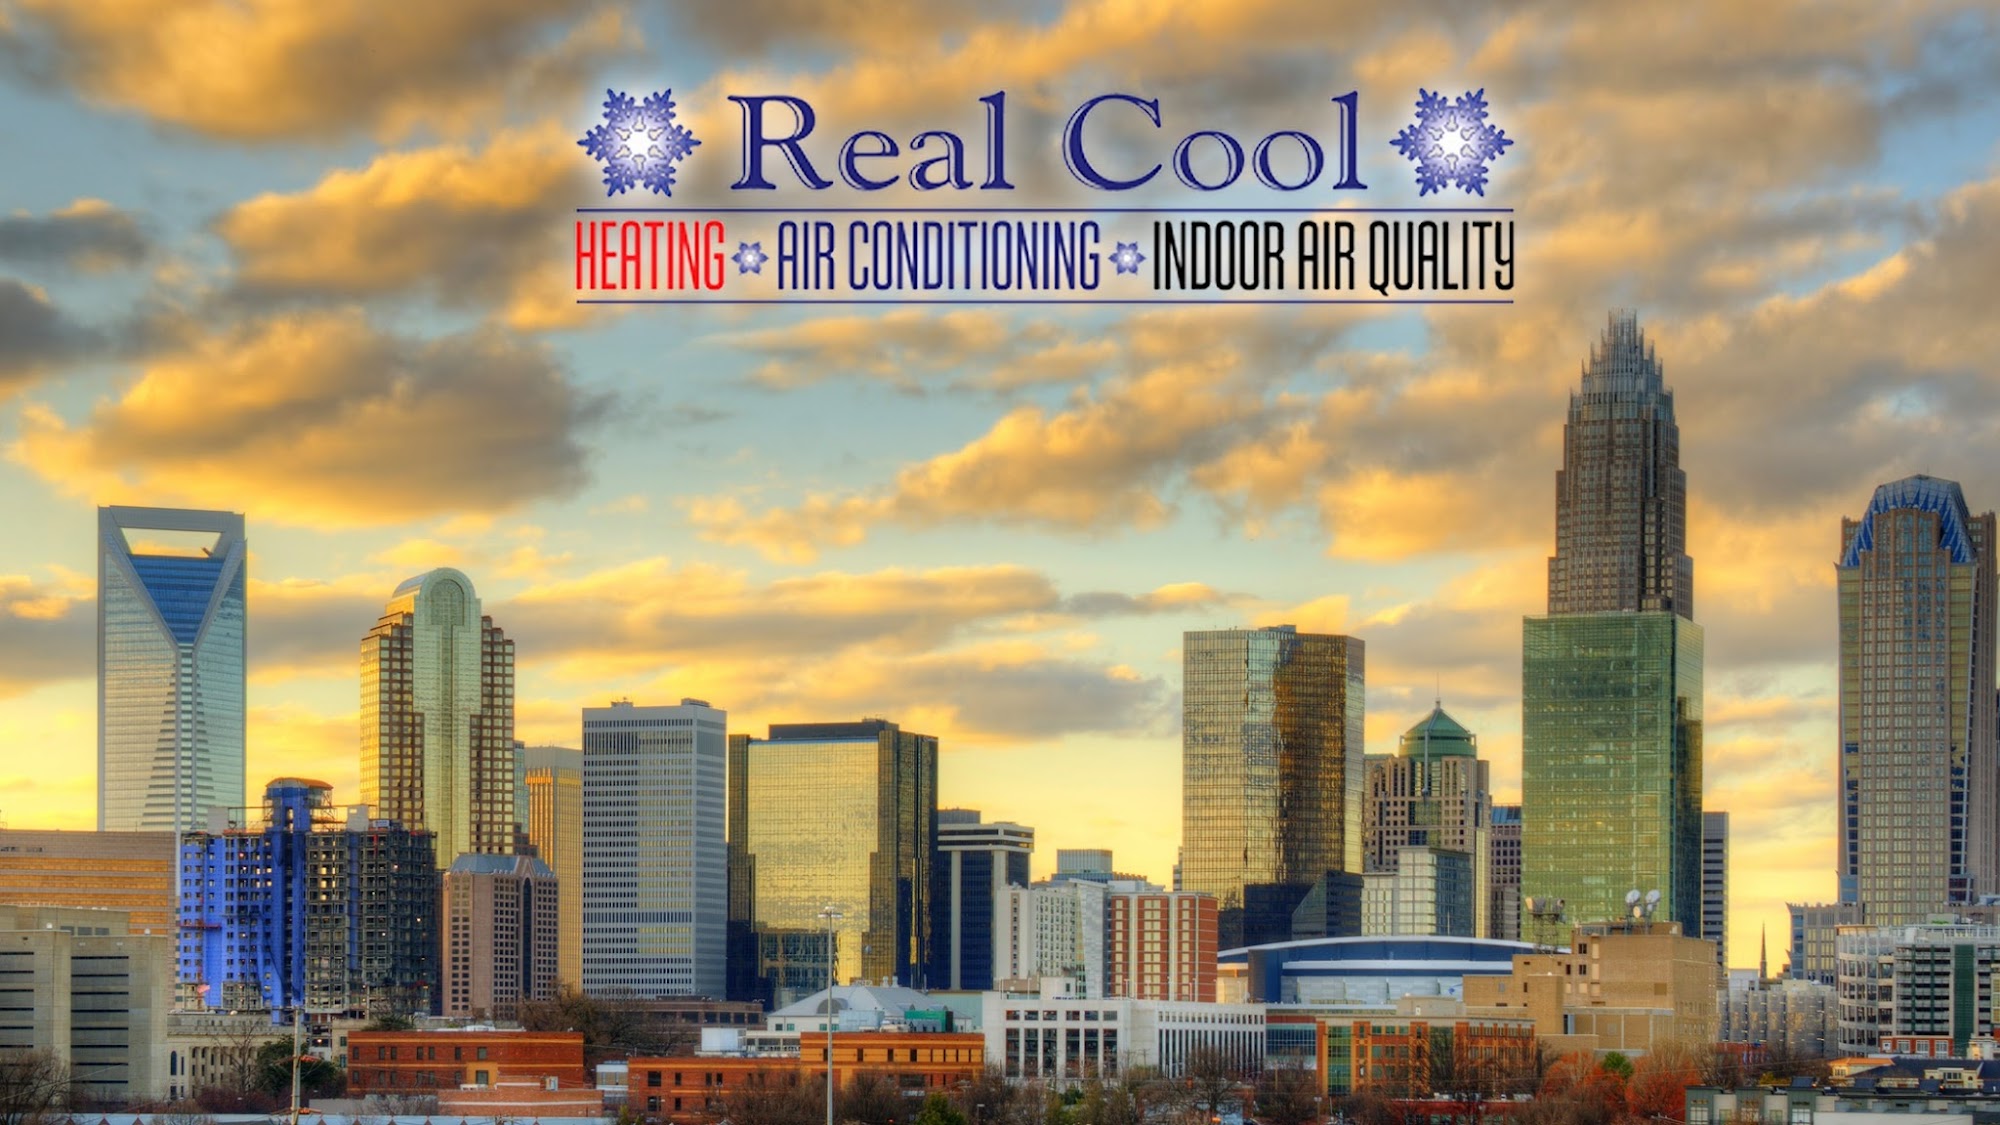 Real Cool Heating, Air Conditioning